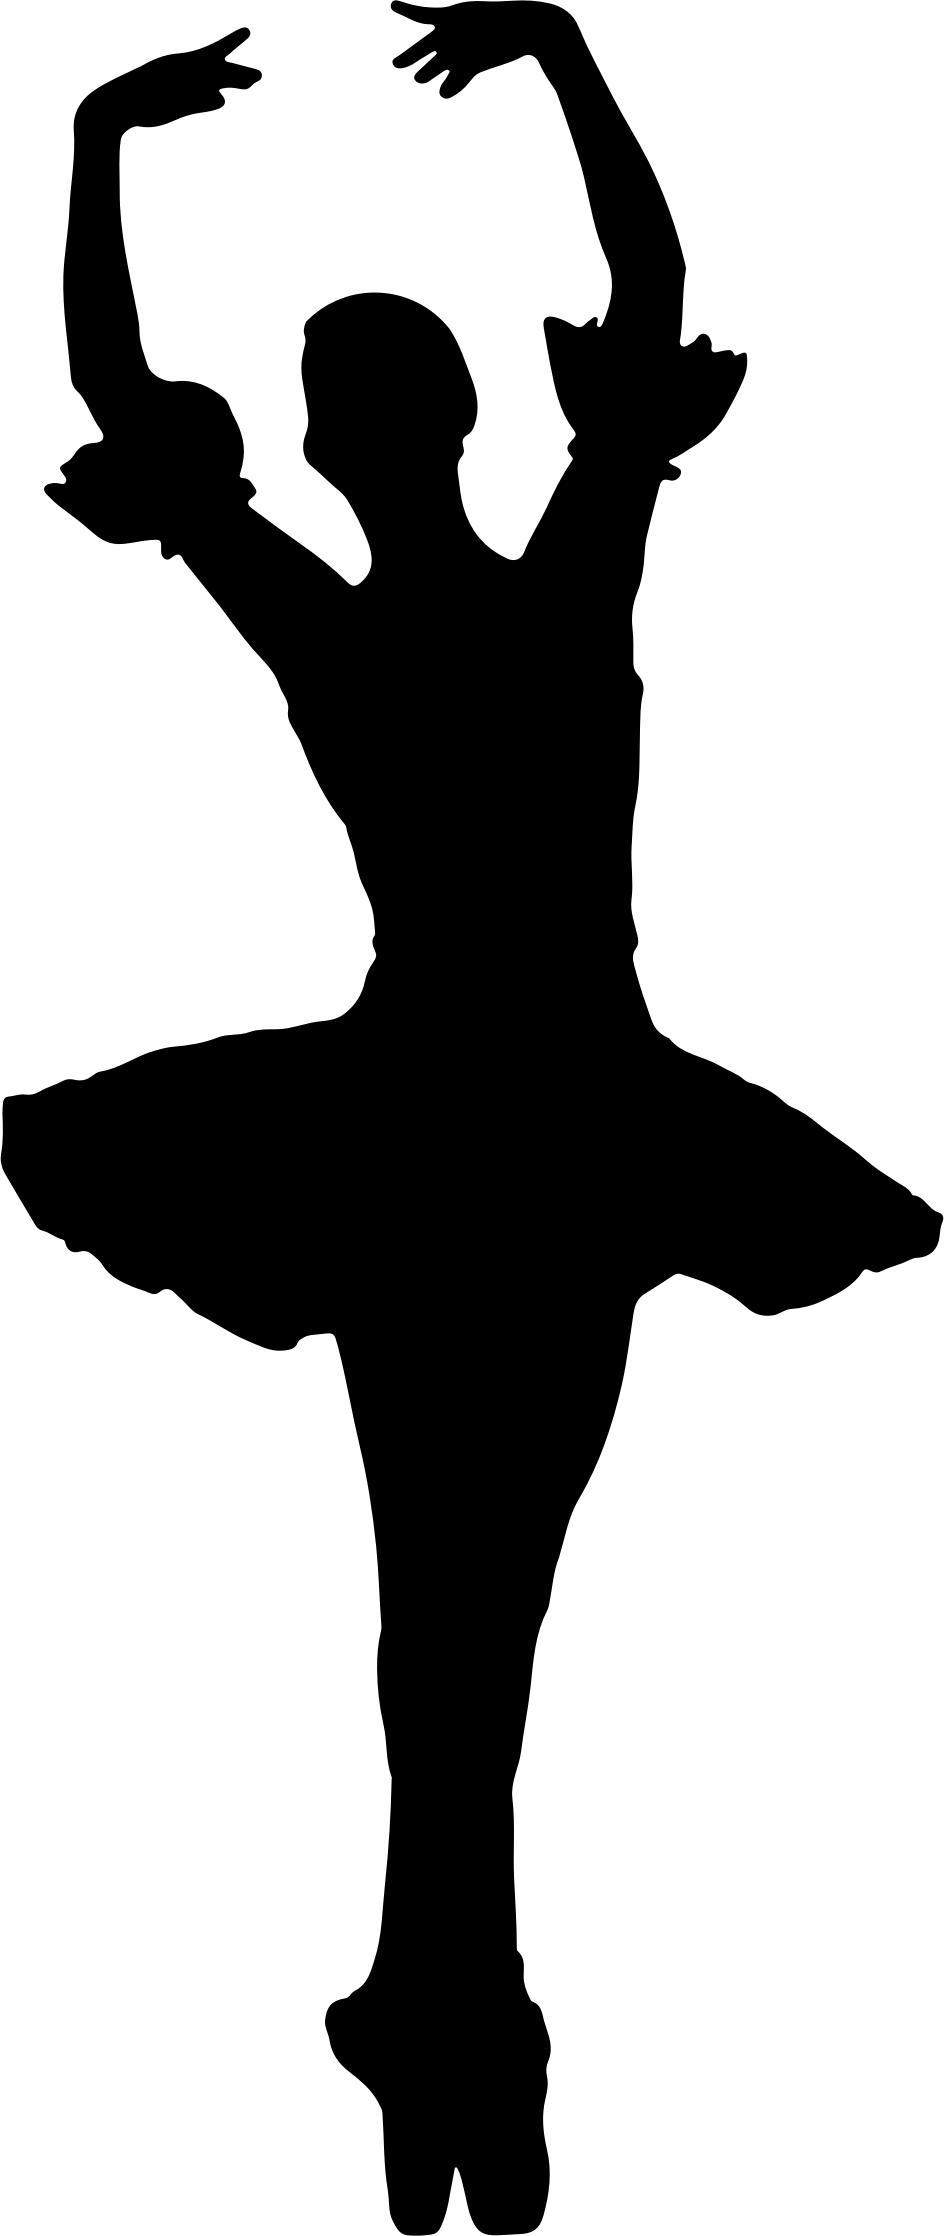 Arms Raised Ballerina Silhouette Without Tiara png transparent